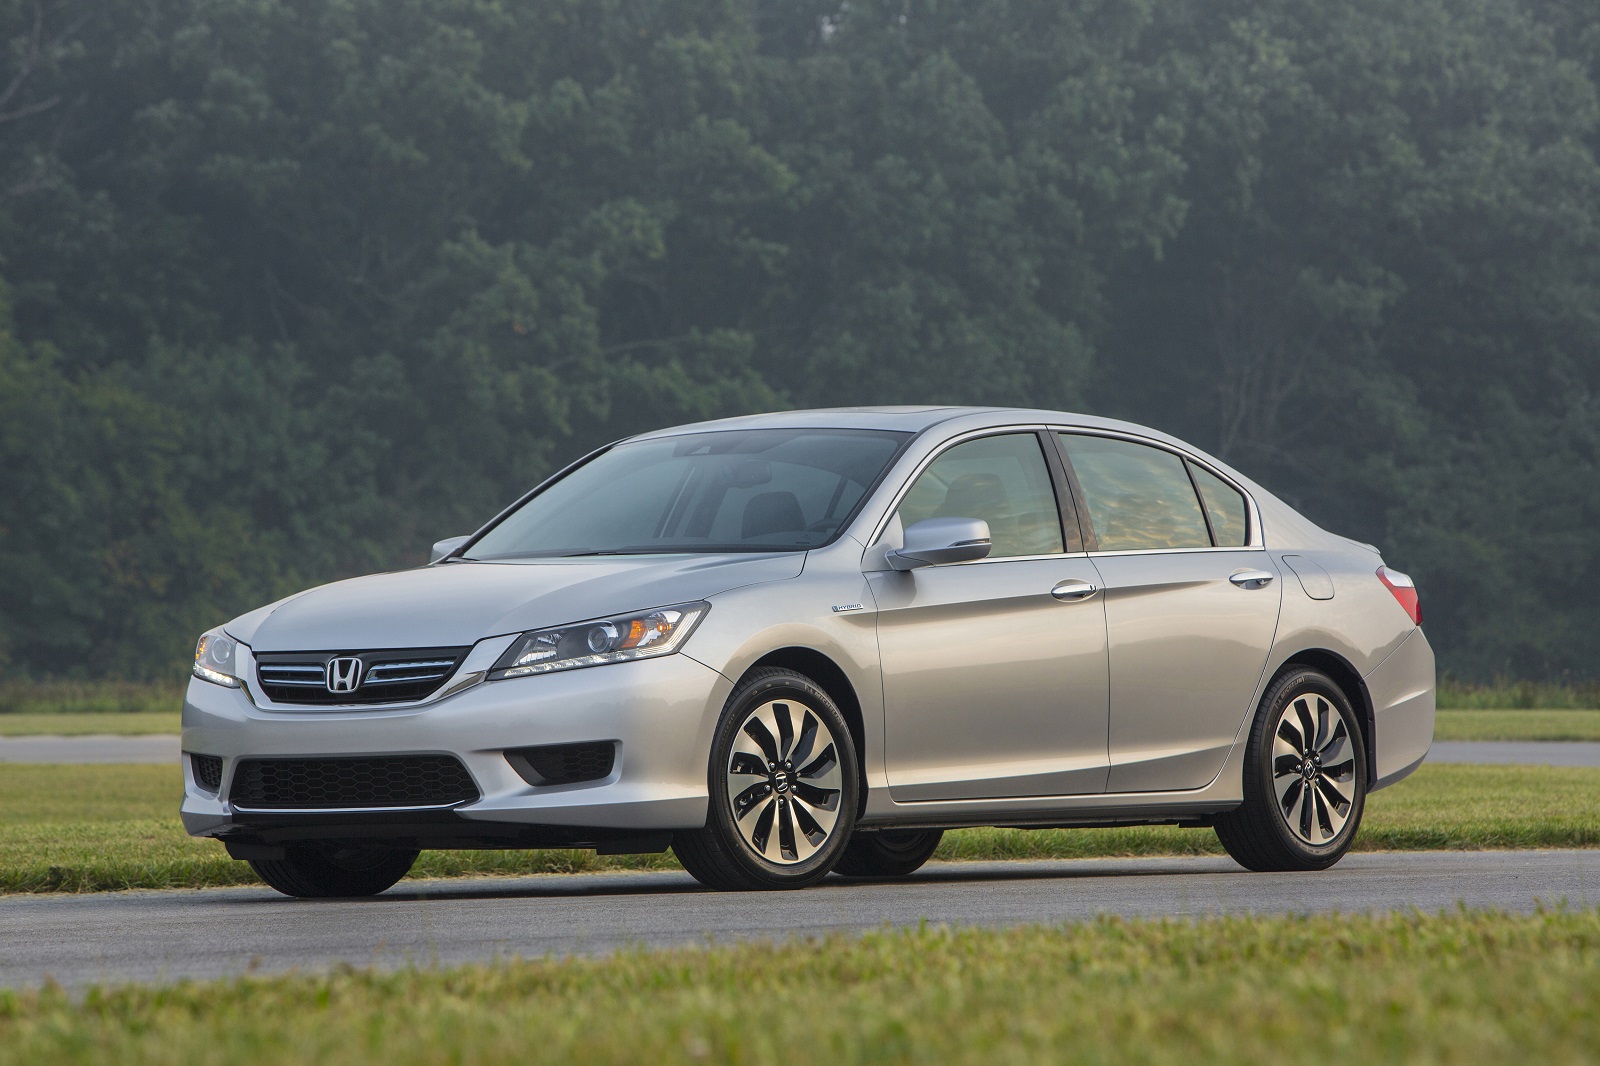 Honda Accord Hybrid Production Relocates From Ohio To Japan